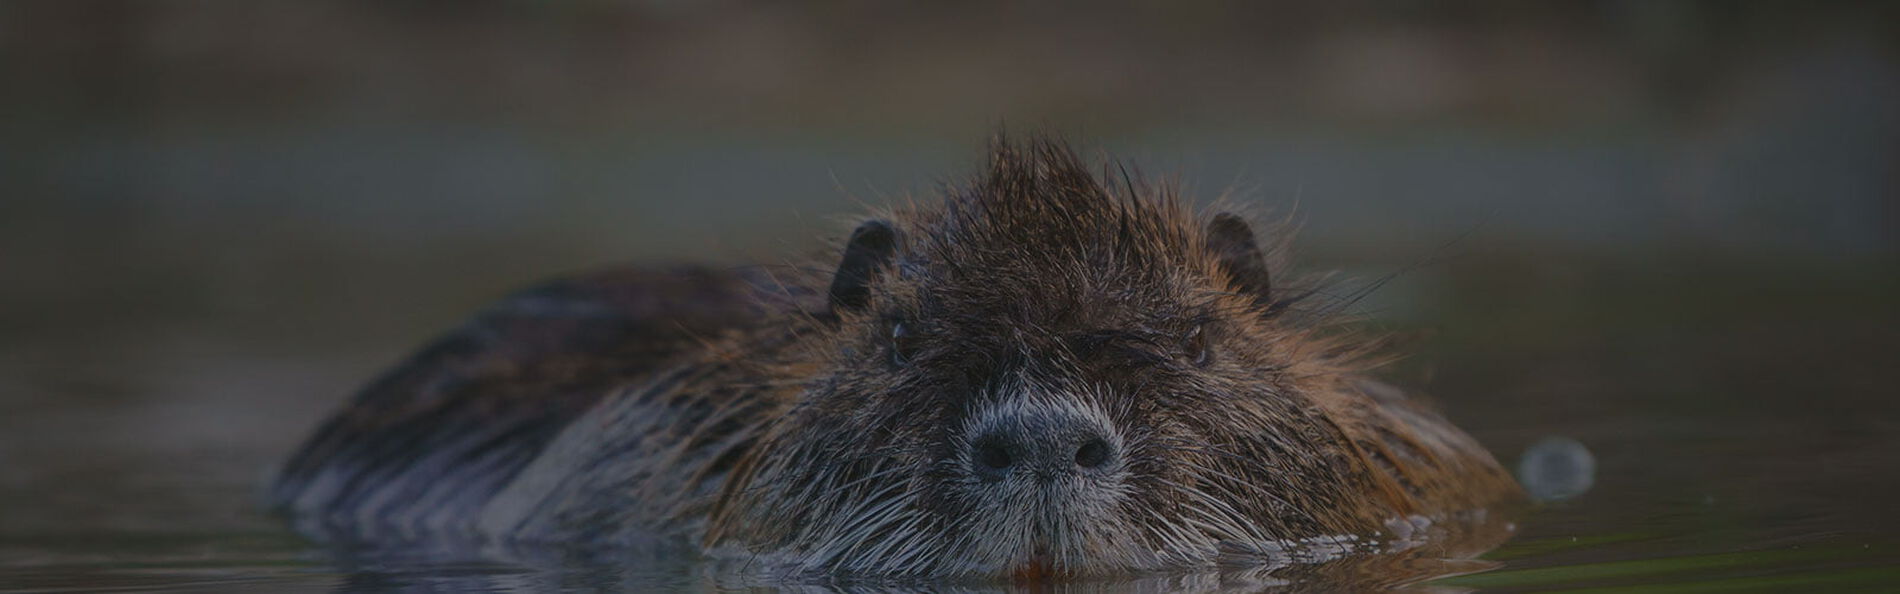 Nutria swimming in water